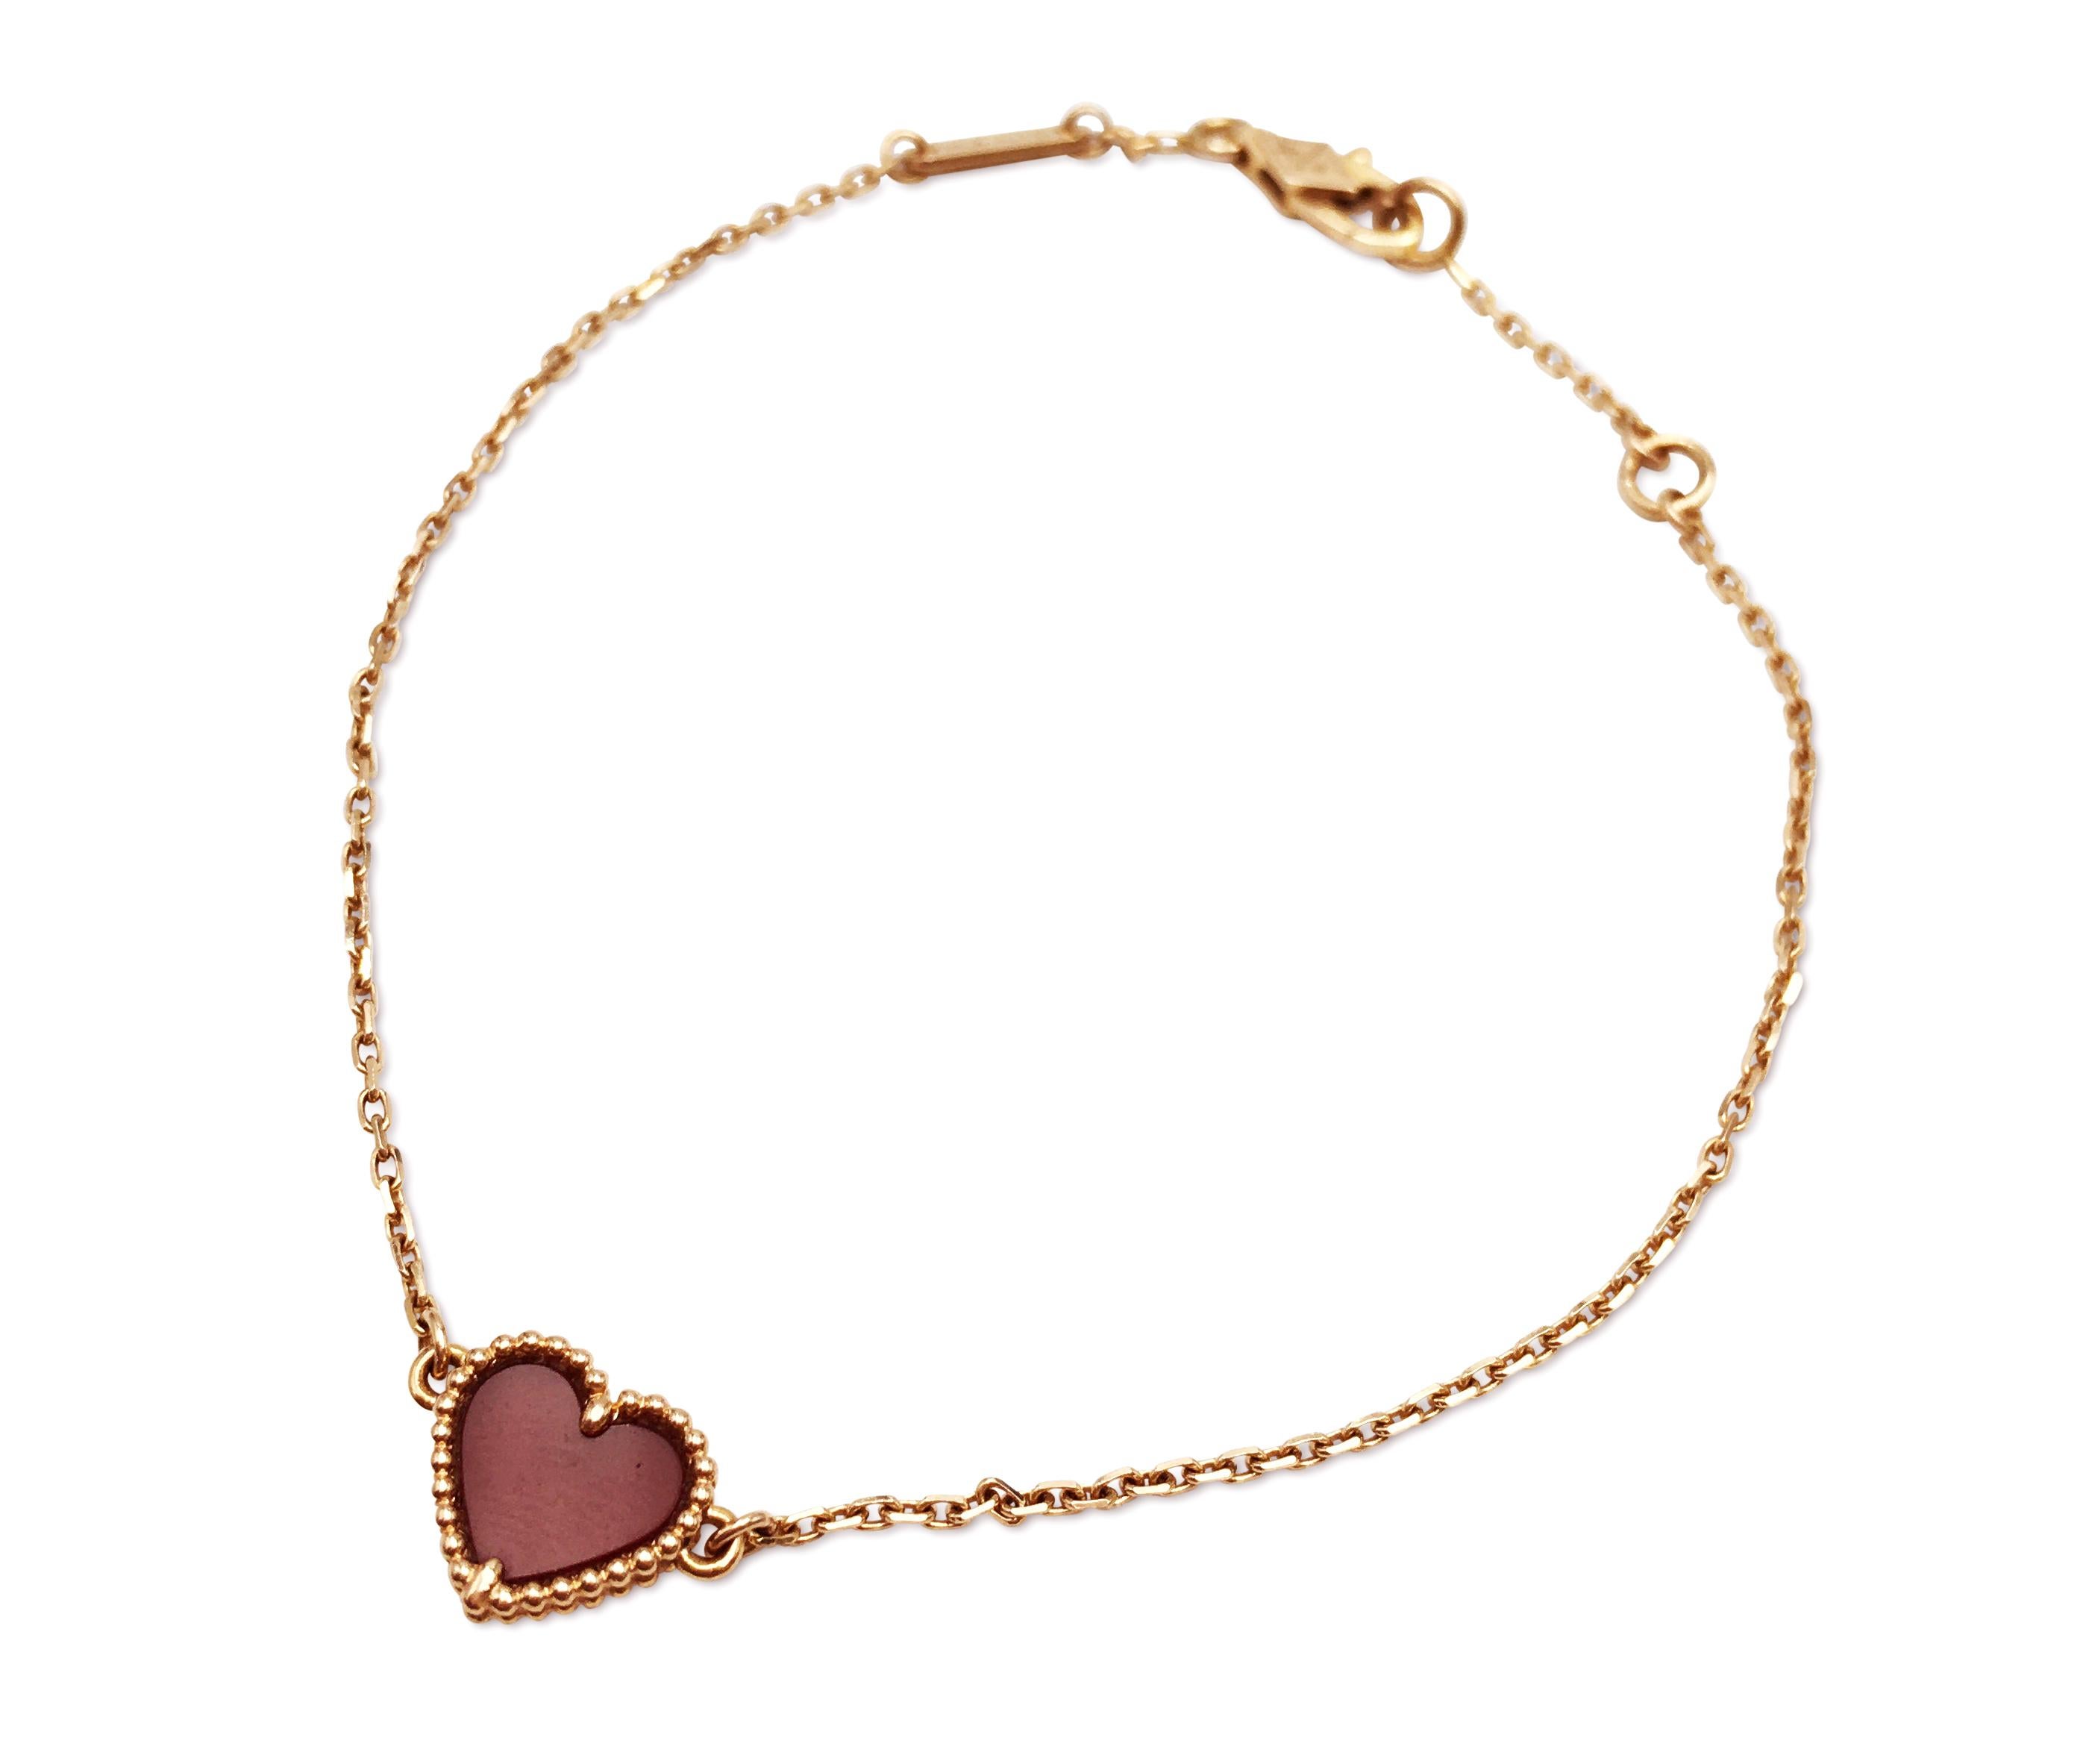 Authentic Van Cleef & Arpels 'Sweet Alhambra Heart' bracelet crafted in 18 karat rose gold features a single carnelian heart motif. Signed VCA, 750, with serial number. The bracelet is not presented with the original box or papers. CIRCA 2010s. 